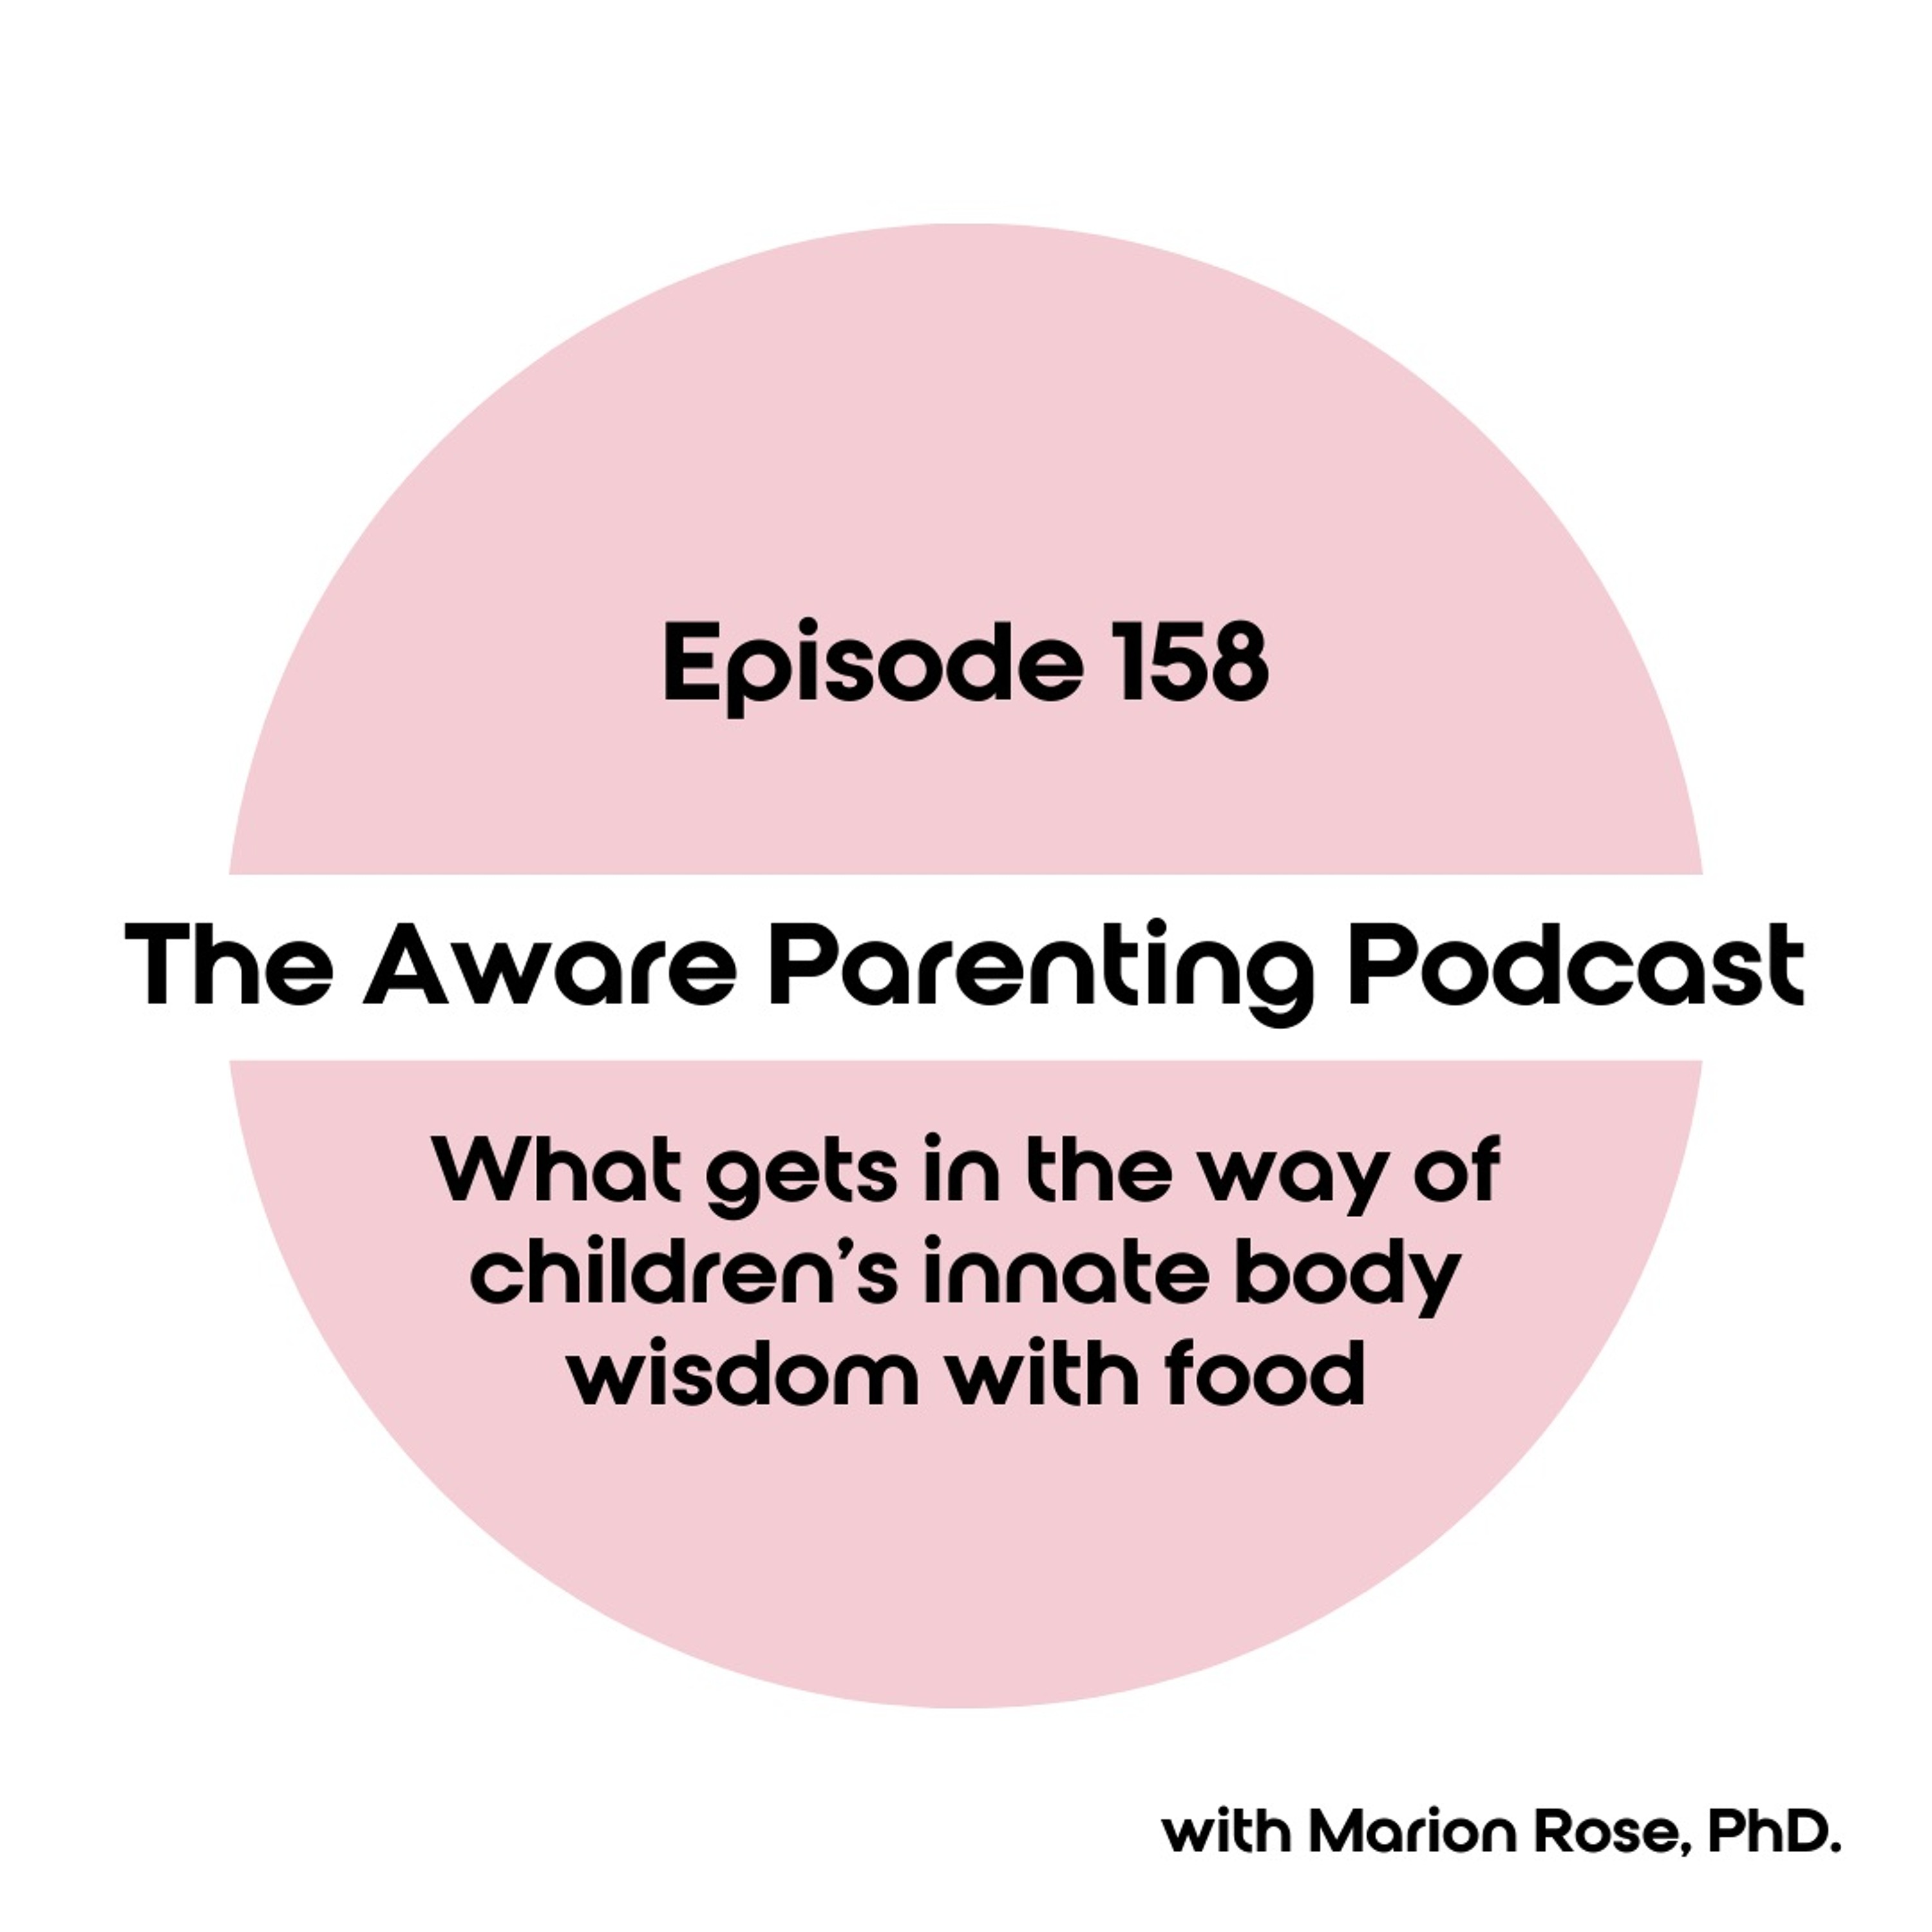 Episode 158: What gets in the way of children's innate body wisdom with food